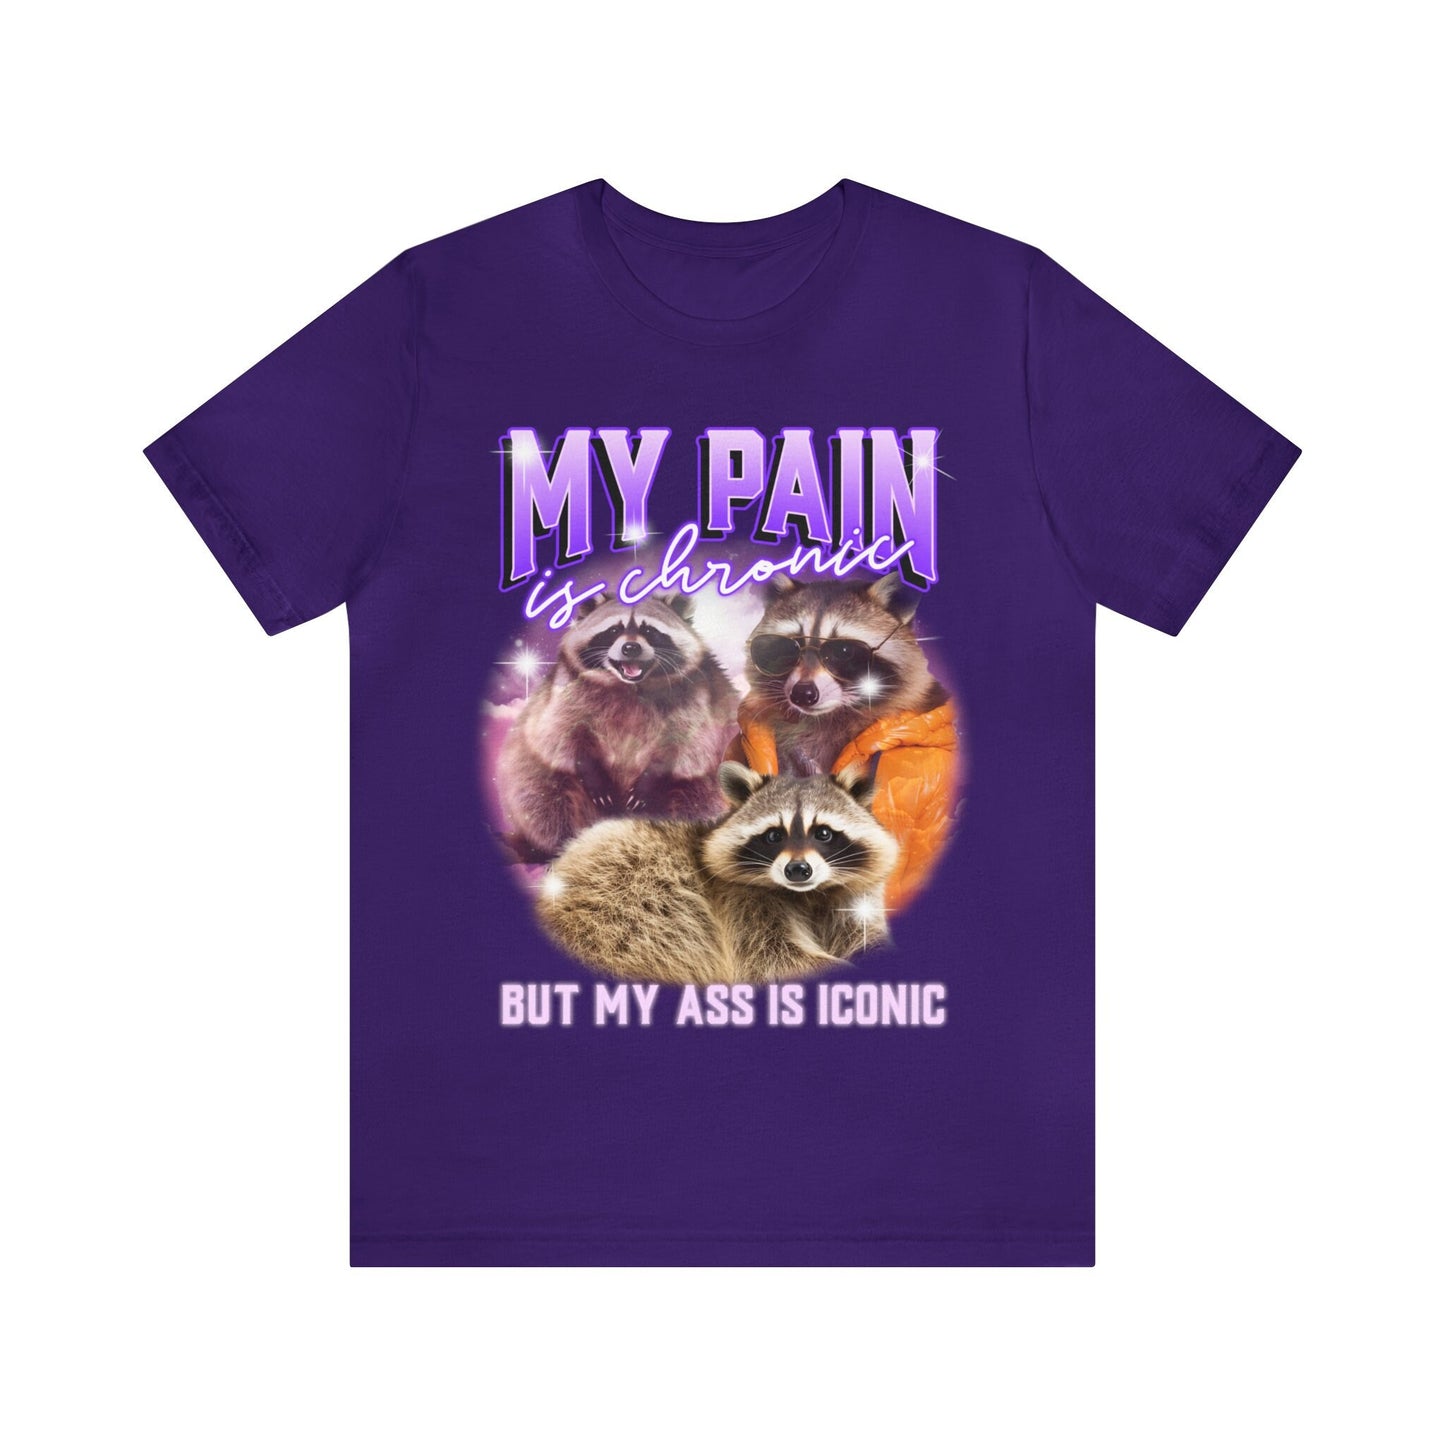 My pain is chronic but my ass is iconic shirt